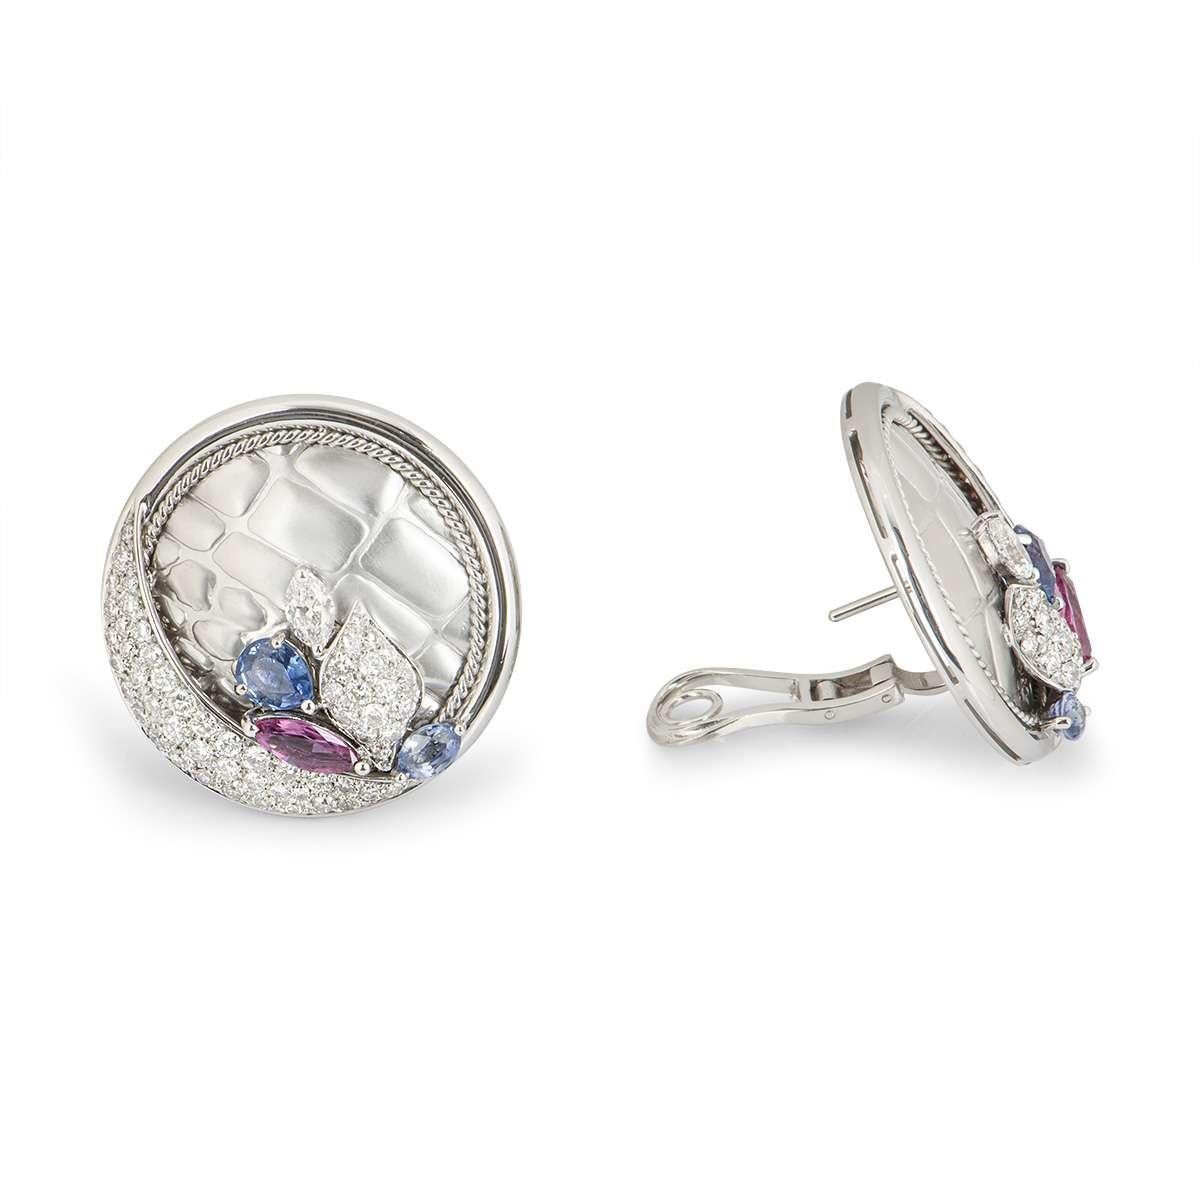 Round Cut White Gold Diamond, Ruby and Sapphire Earrings 3.04 Carat